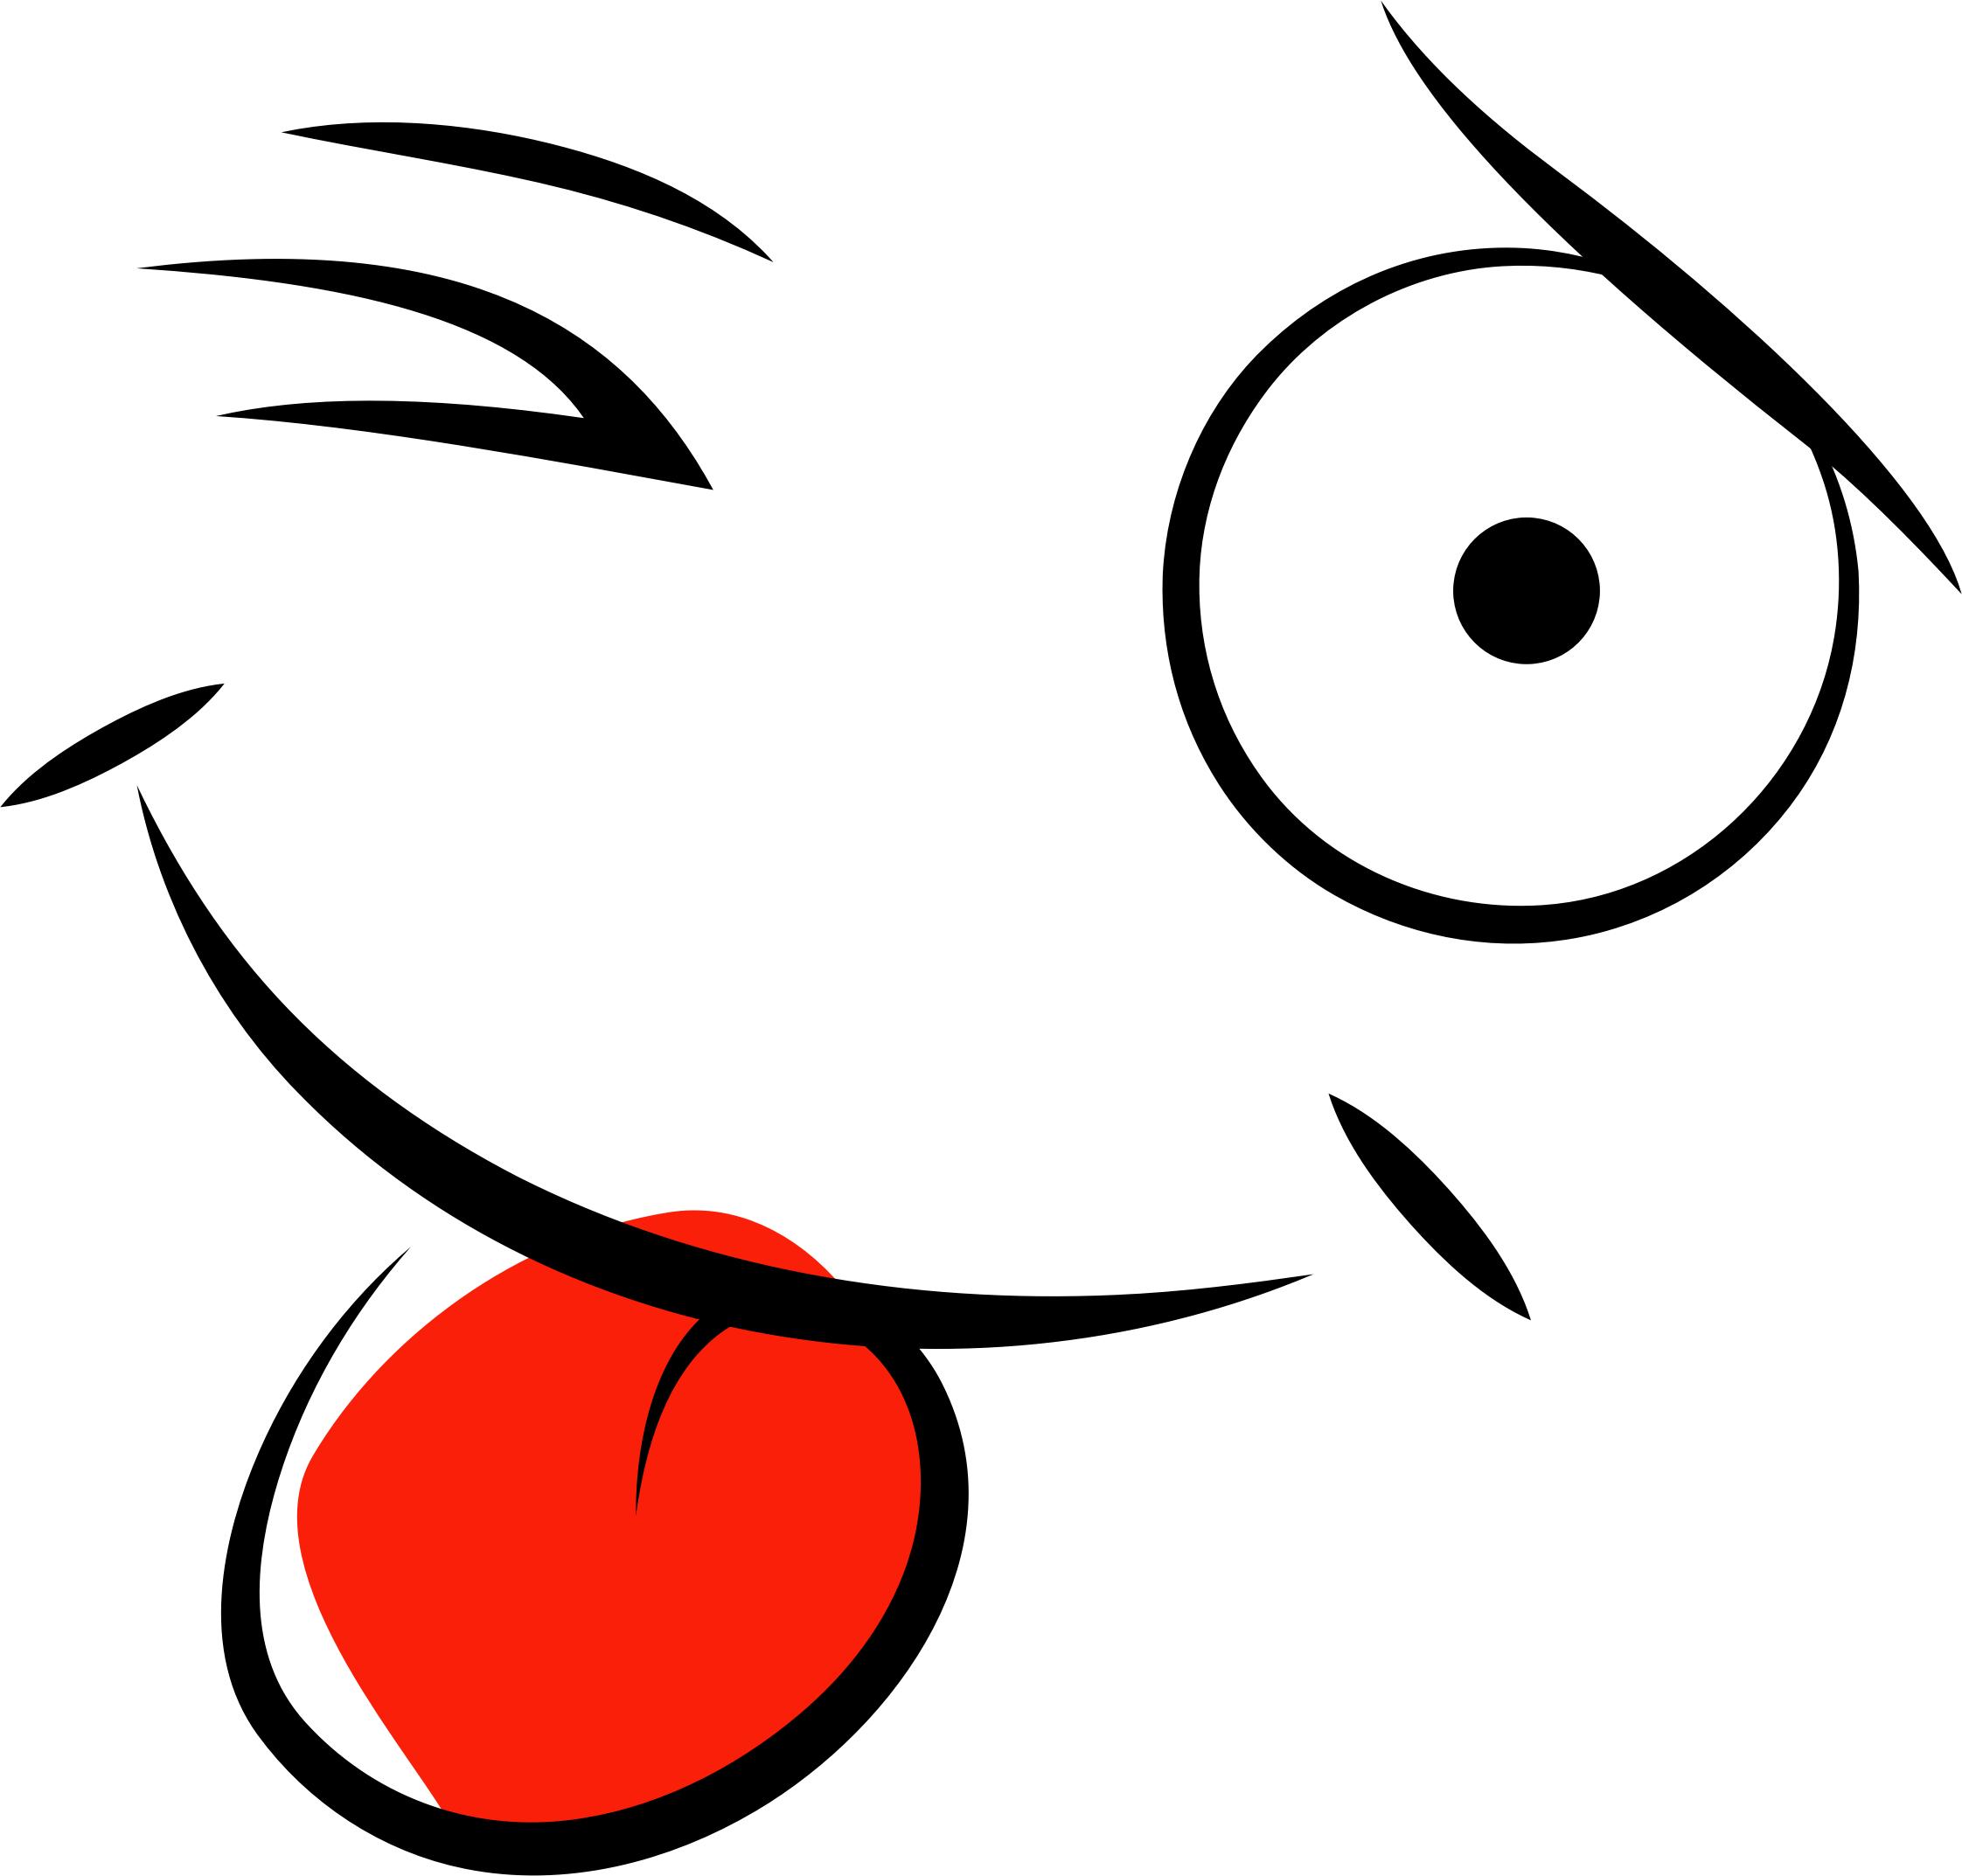 Raspberry Smiley png